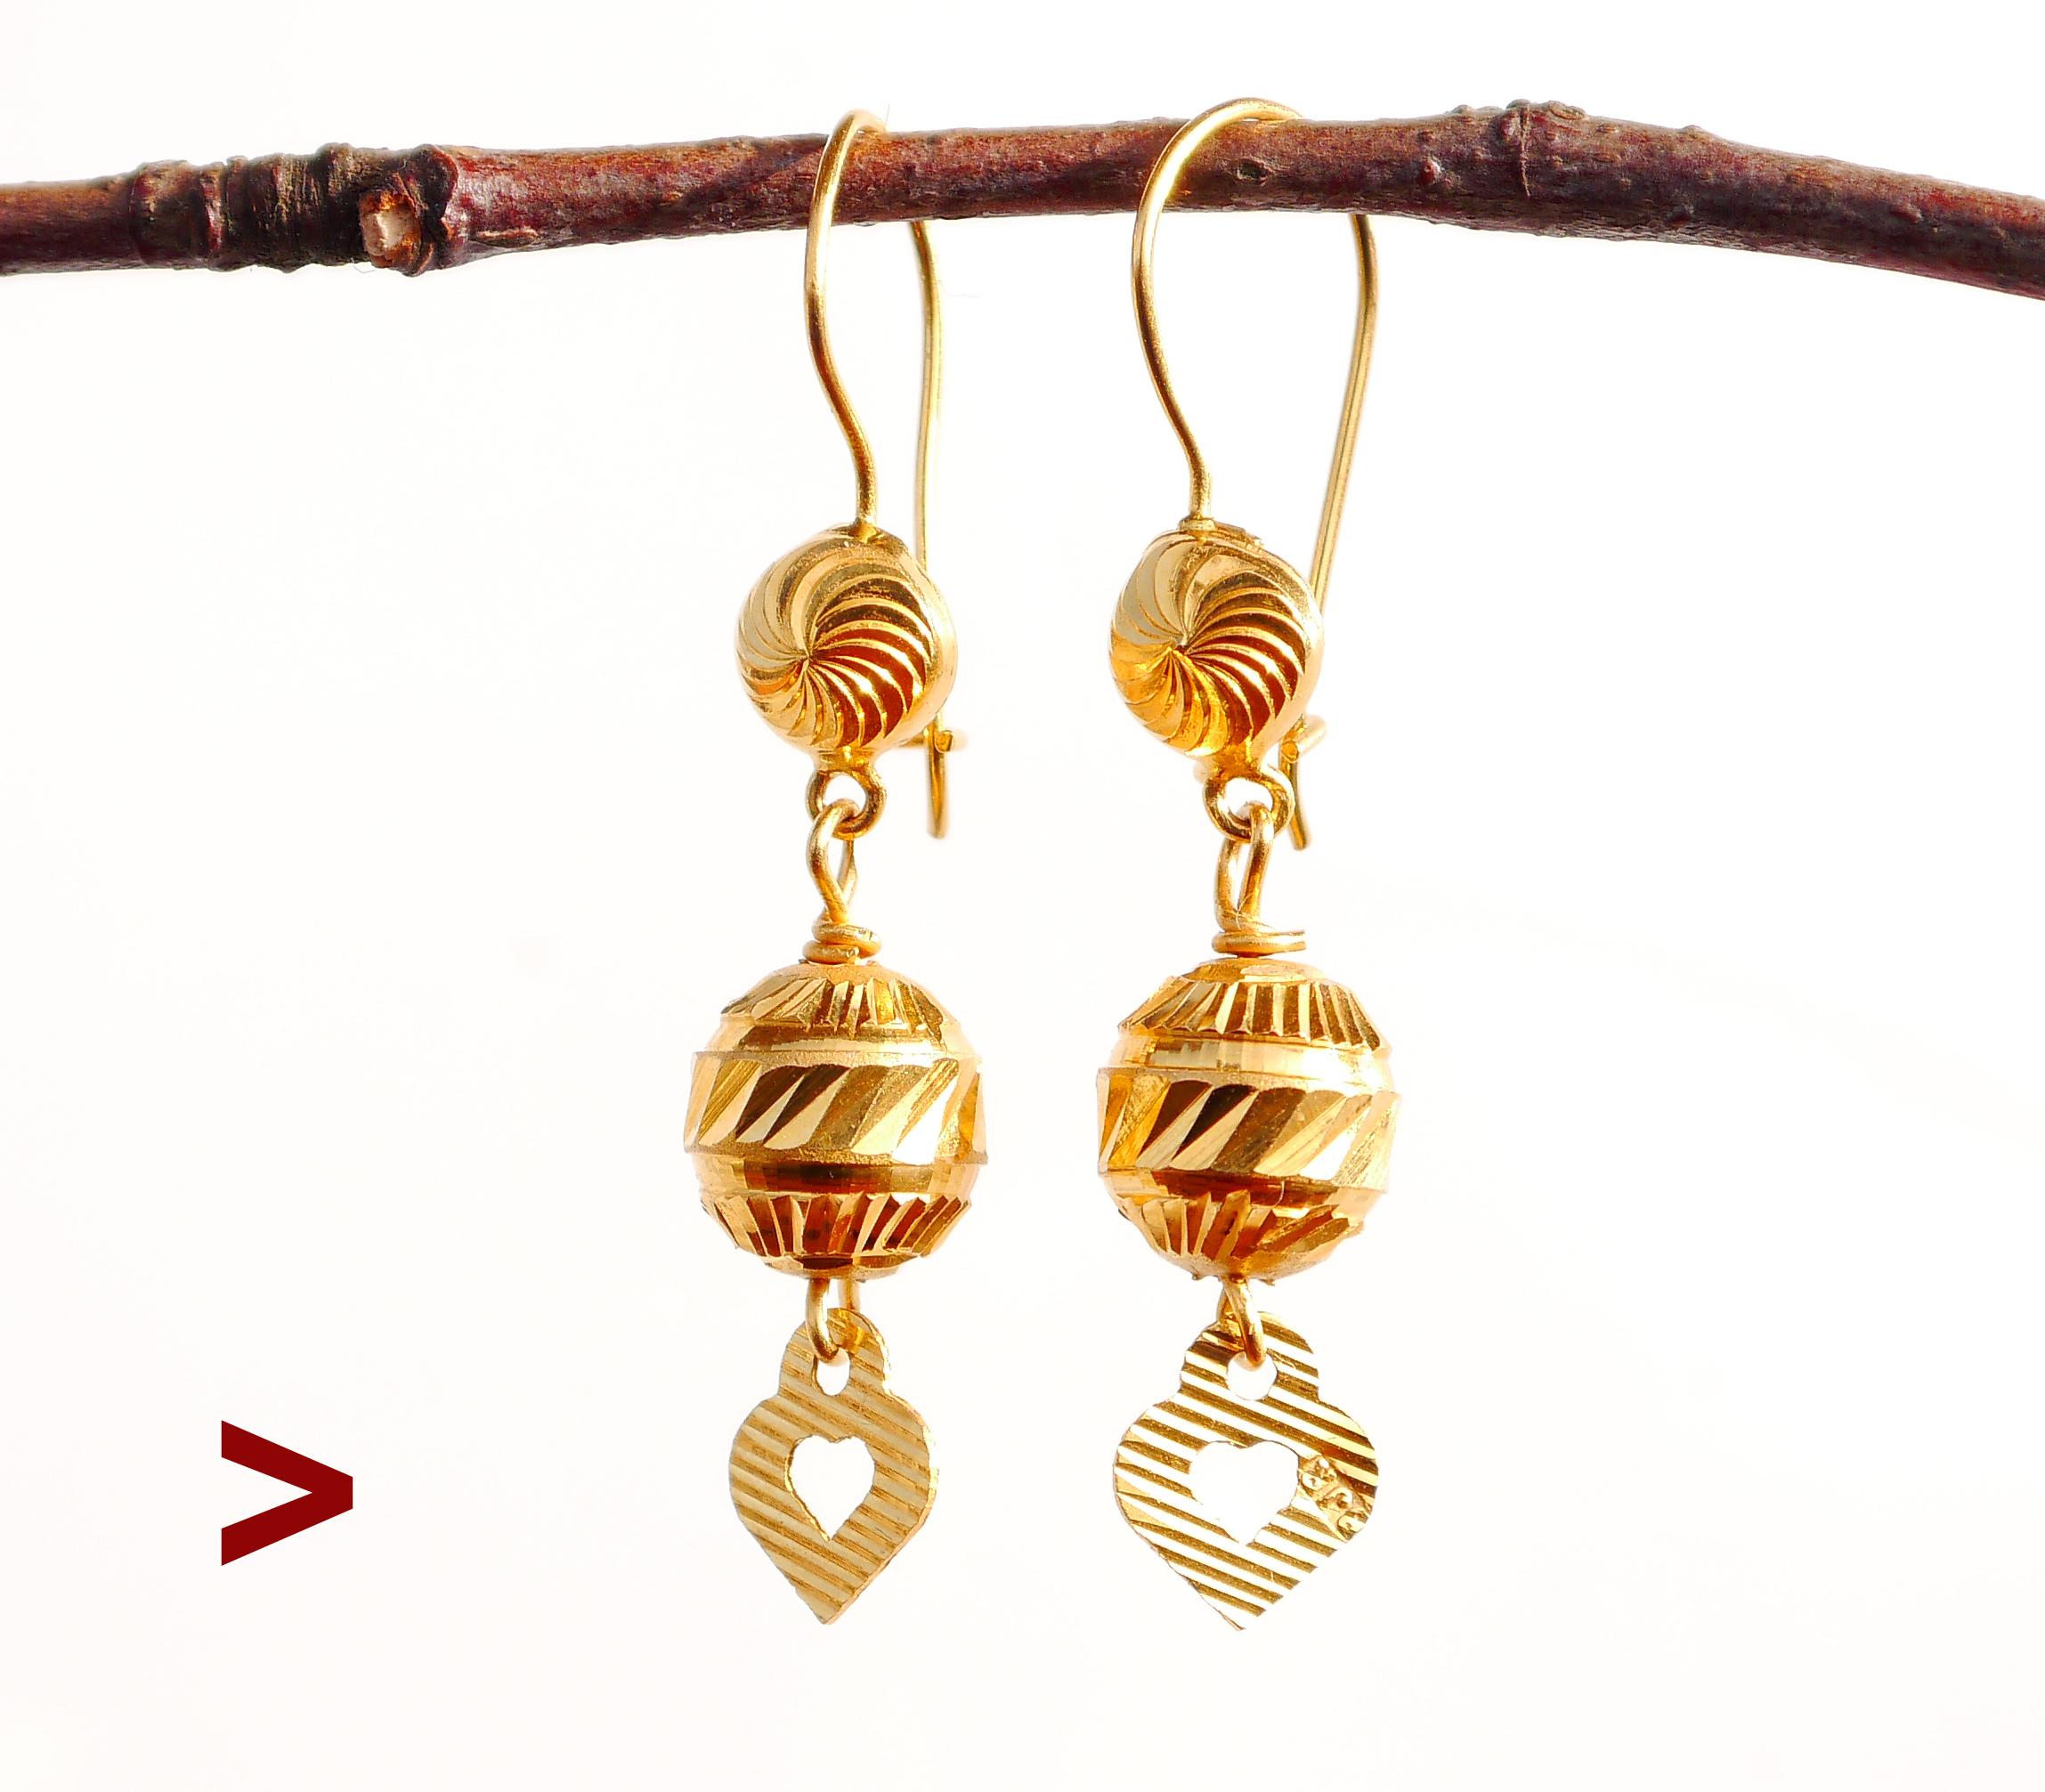 A pair of dangles with faceted parts in solid 21K Yellow Gold. Origin : likely Middle East.

Tested solid 21K Gold. Fine used condition, no dents or other damages, no repairs.

Each ring is 38 mm long including the hanger. Each ball Ø 7.5